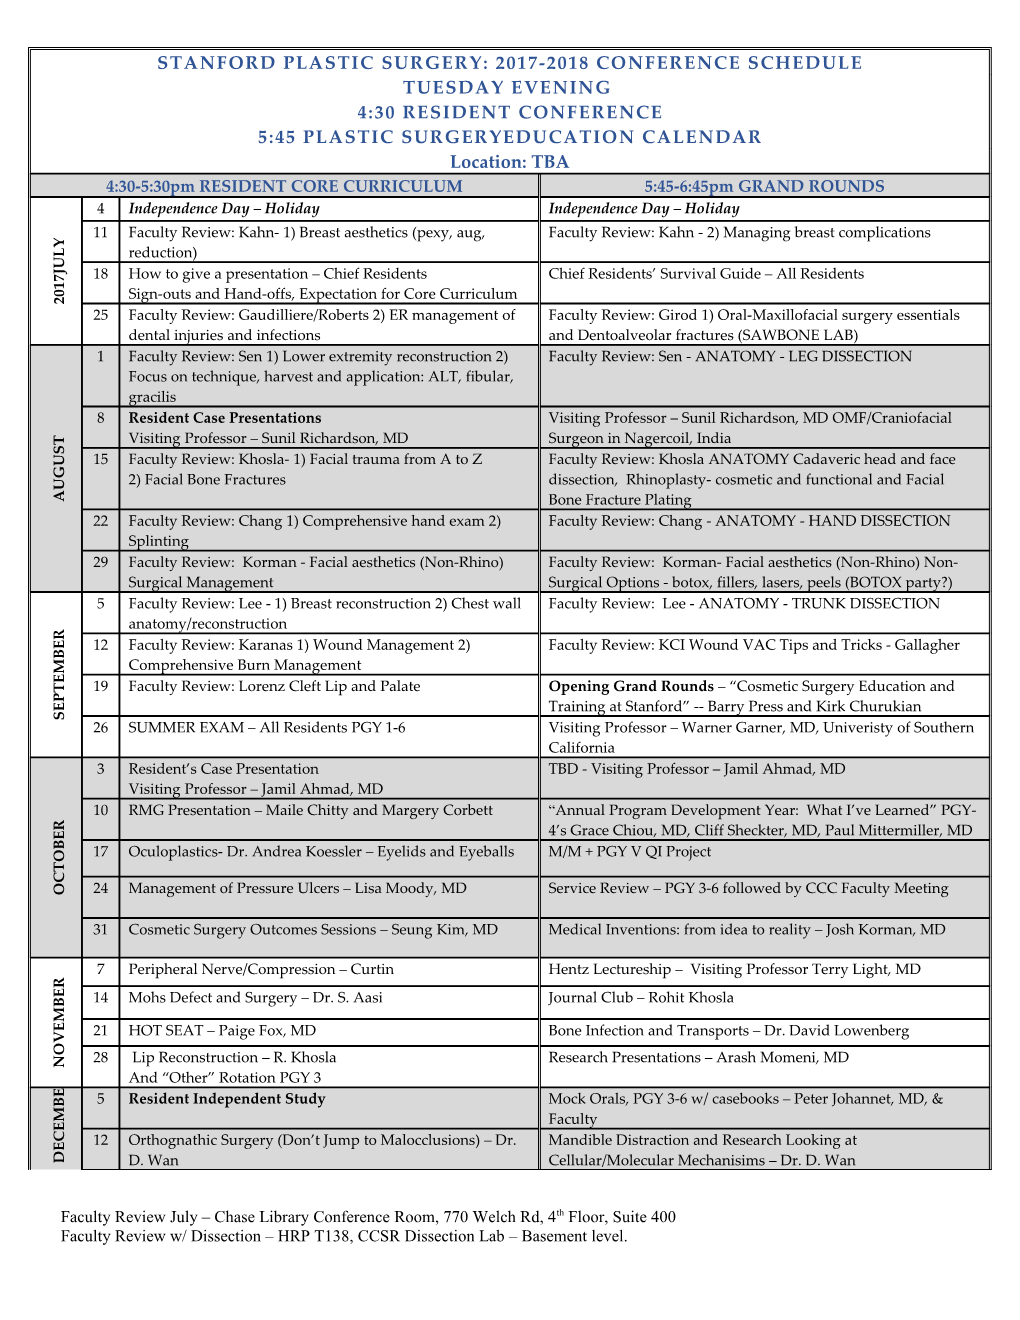 Stanford Plastic Surgery: 2007-2008 Conference Schedule